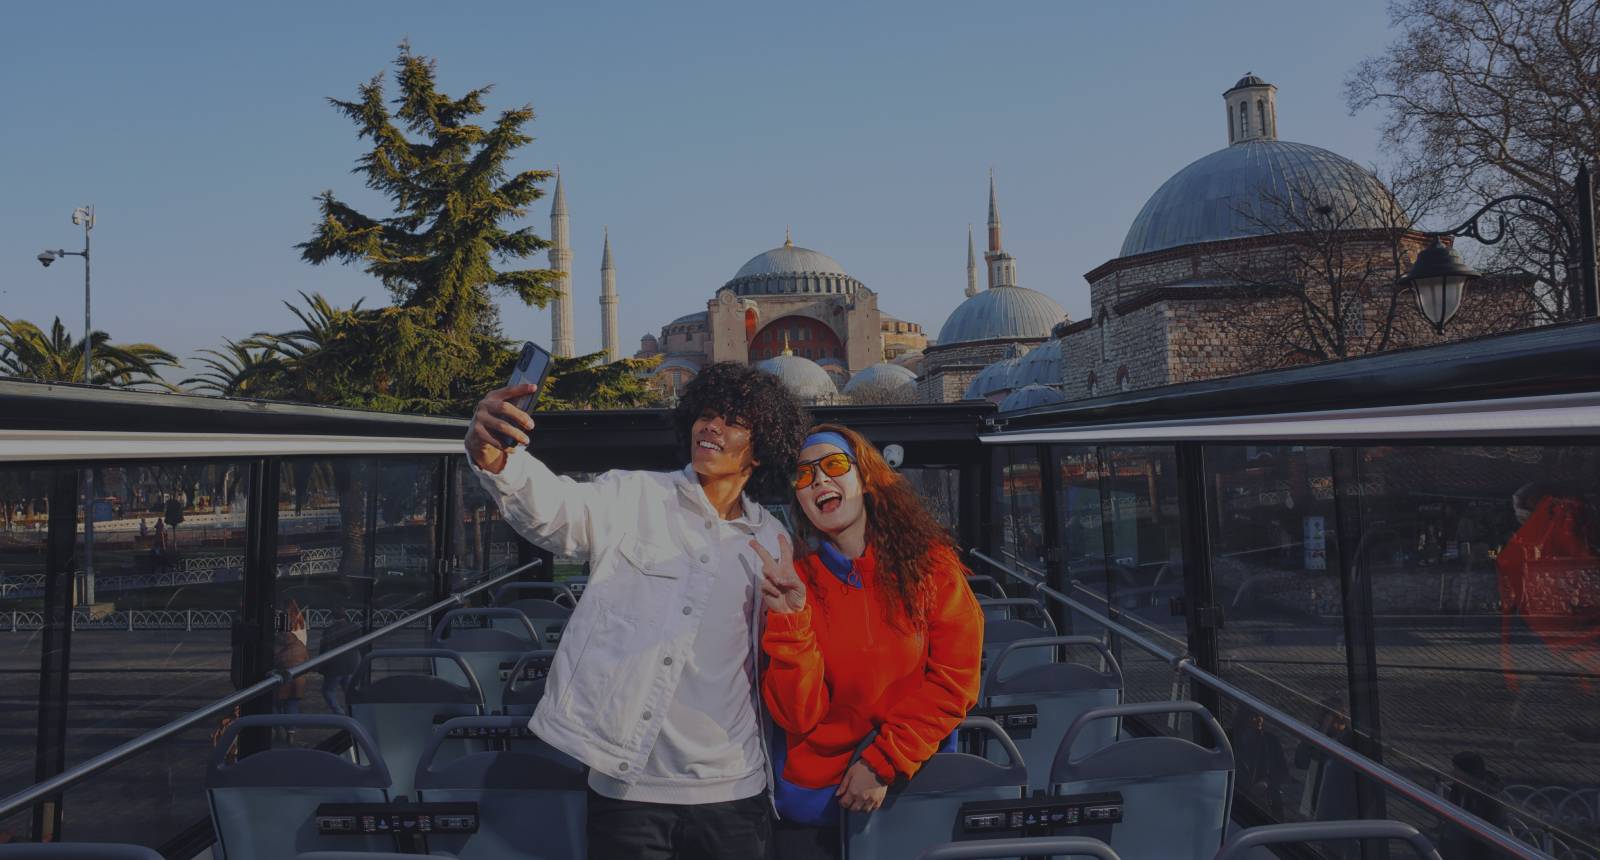 istanbul red bus tour